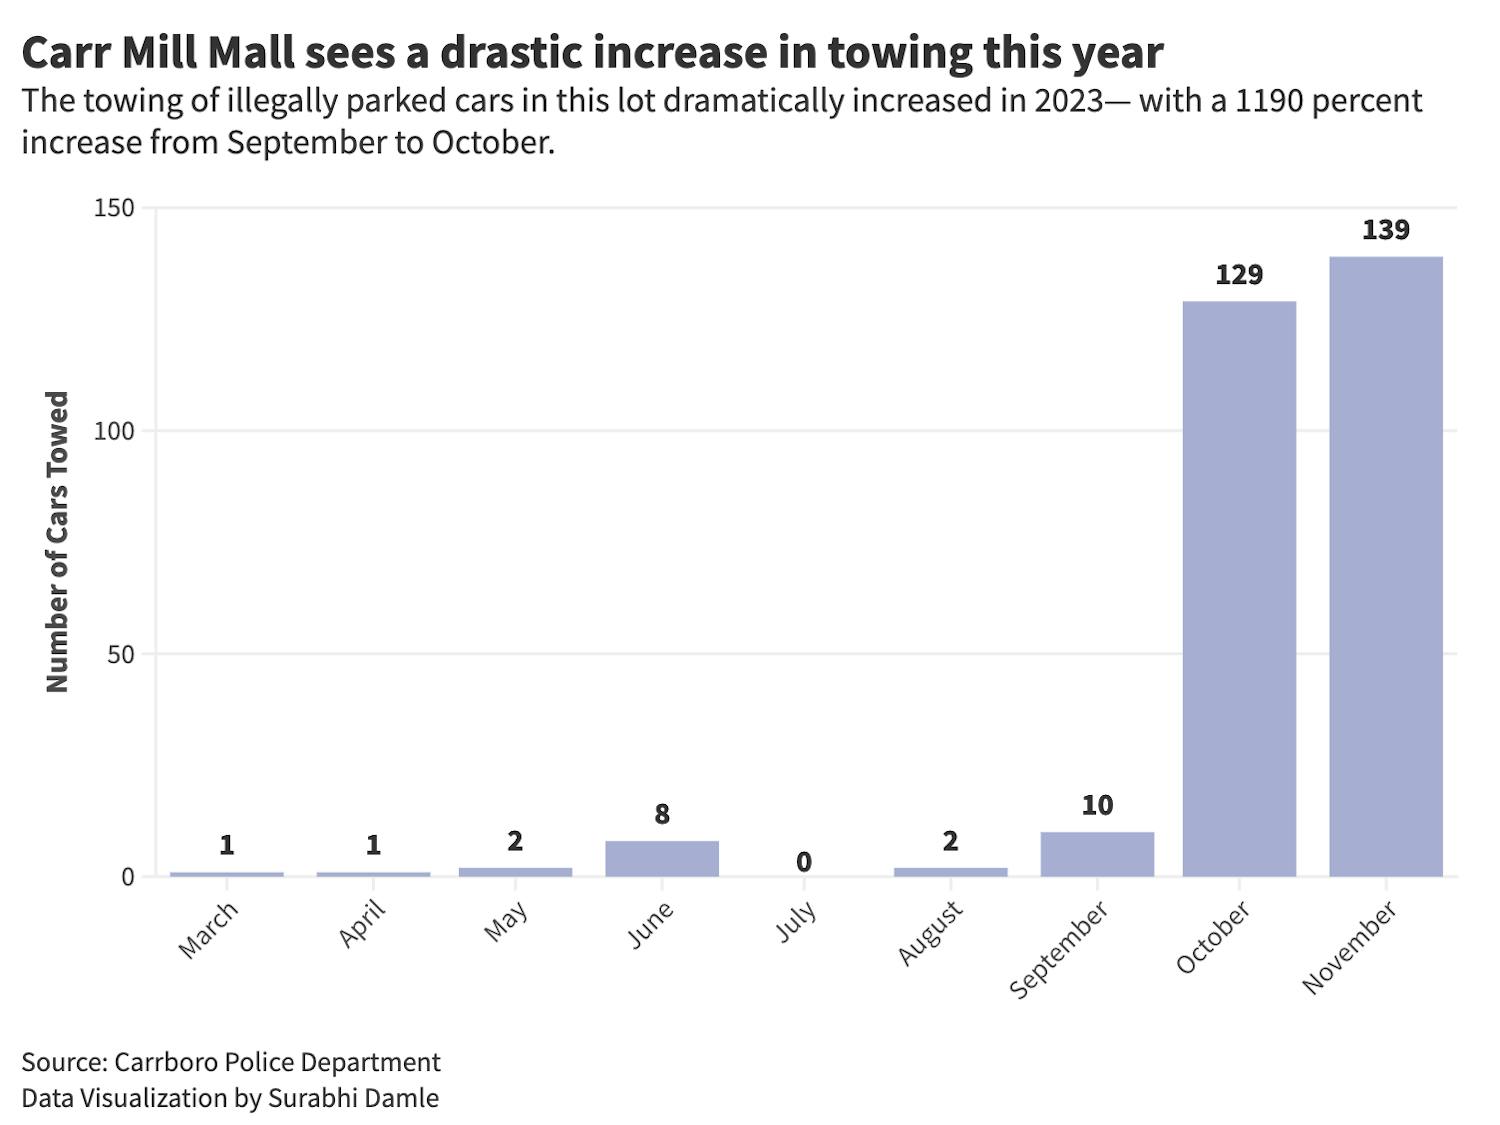 Visualization: Carr Mill Mall sees a drastic increase in towing this year